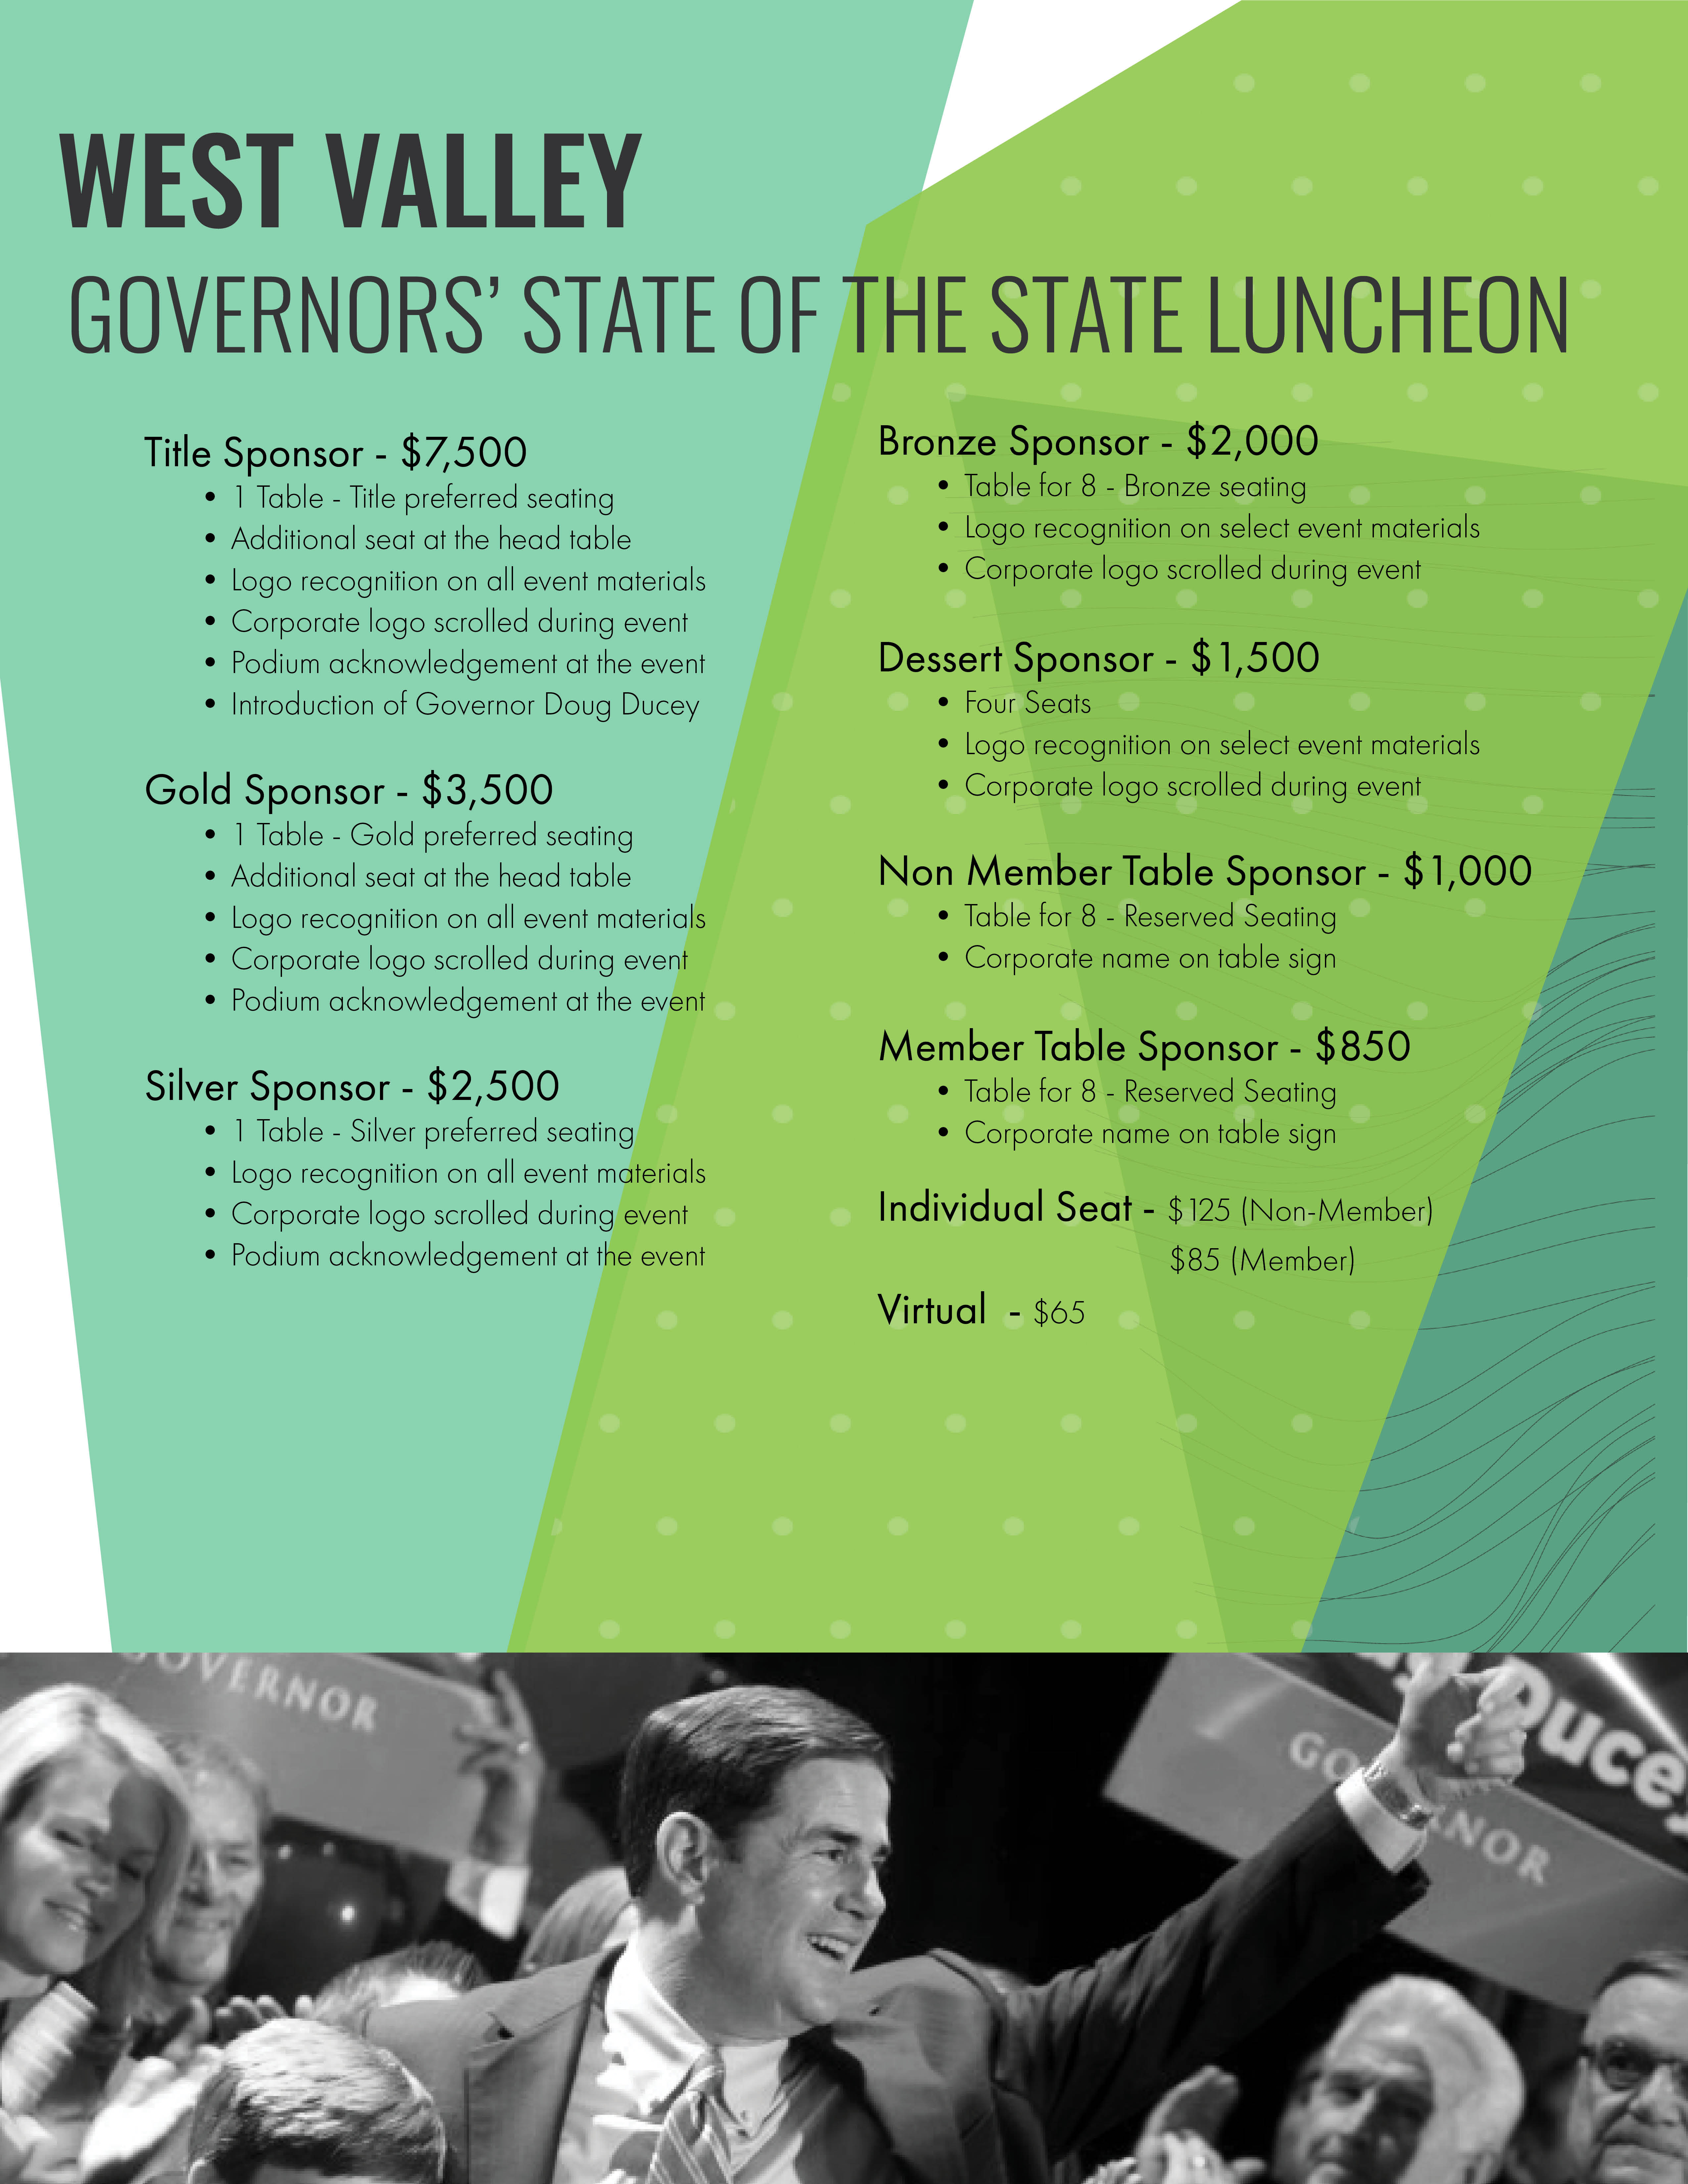 GOVERNORS’ STATE OF THE STATE LUNCHEON